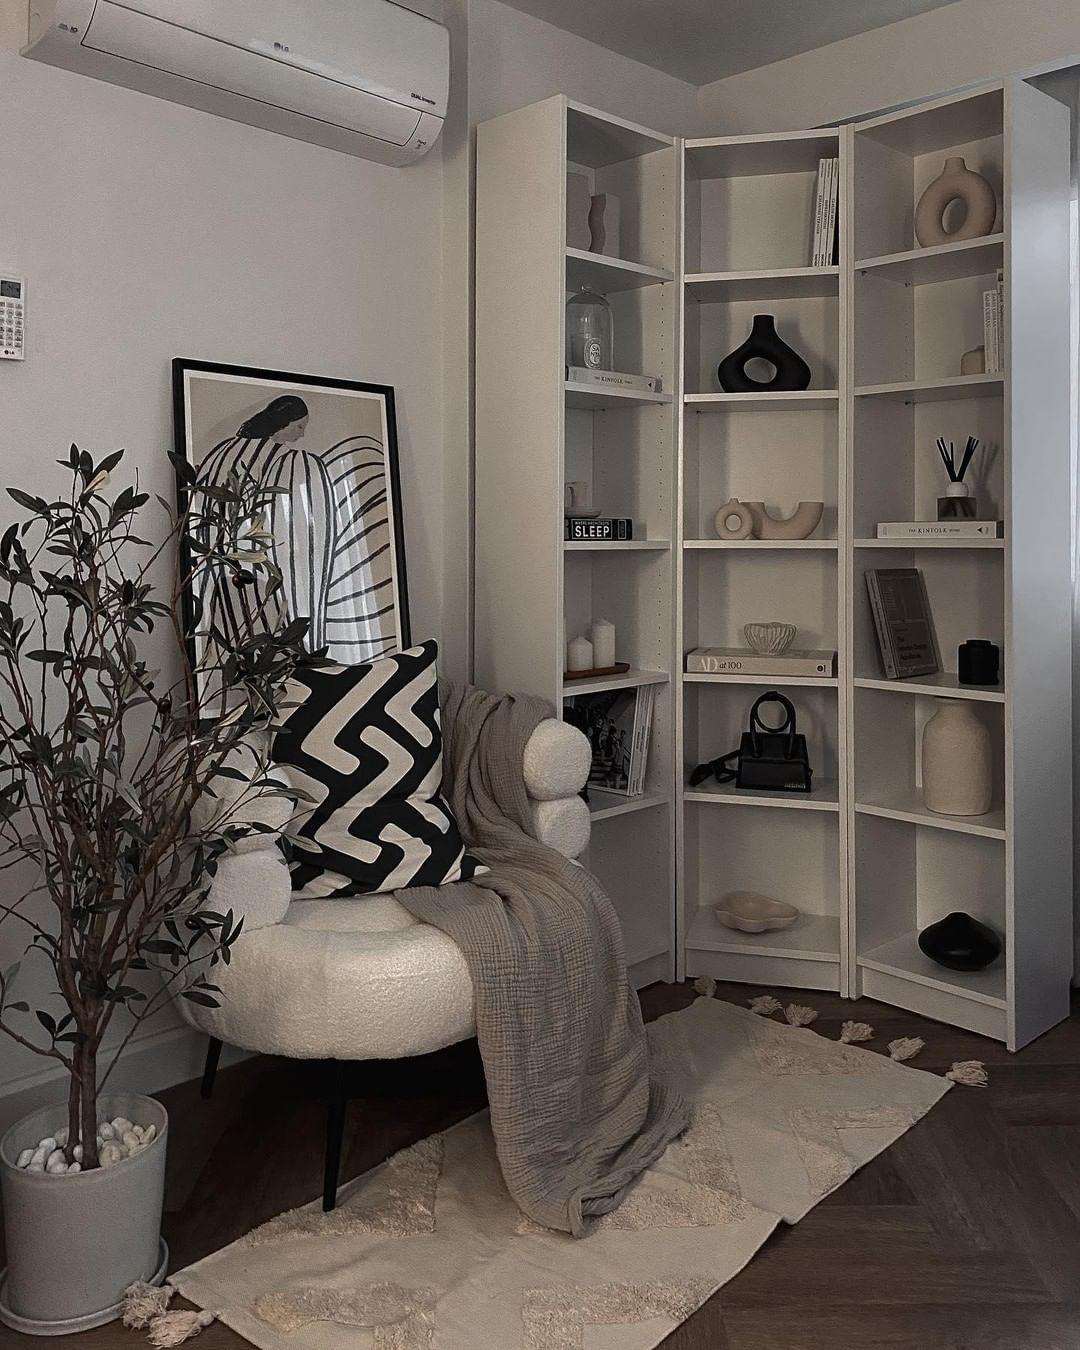 class="content__text"
 And just like that, another corner transforms from awkward to amazing, thanks to a perfectly placed bookcase ✨​

📸 : @pollysann.n 

How do you style your home with IKEA? Tag us and you could be featured on our feed and website!

 #IKEASpotting #MakeHomeCountIKEA #IKEAMalaysia #BILLY #storageideas​ 
 